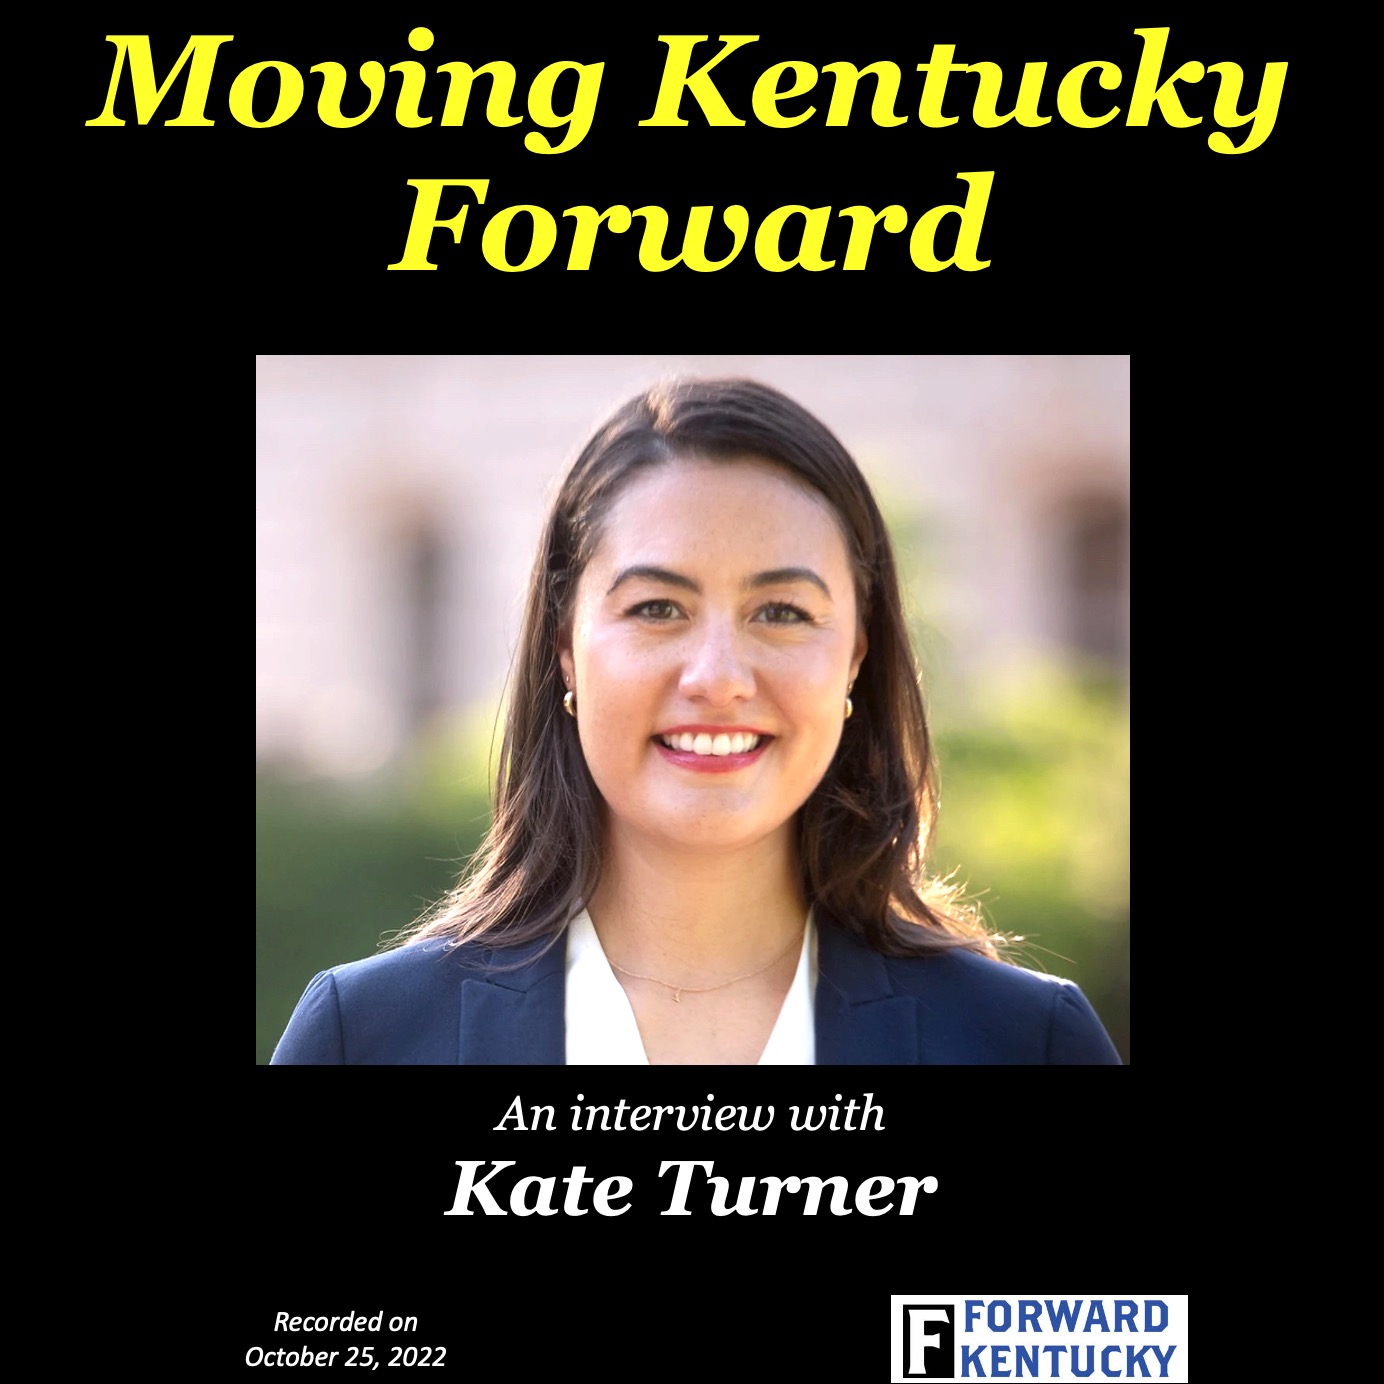 Kate Turner, candidate for KY House